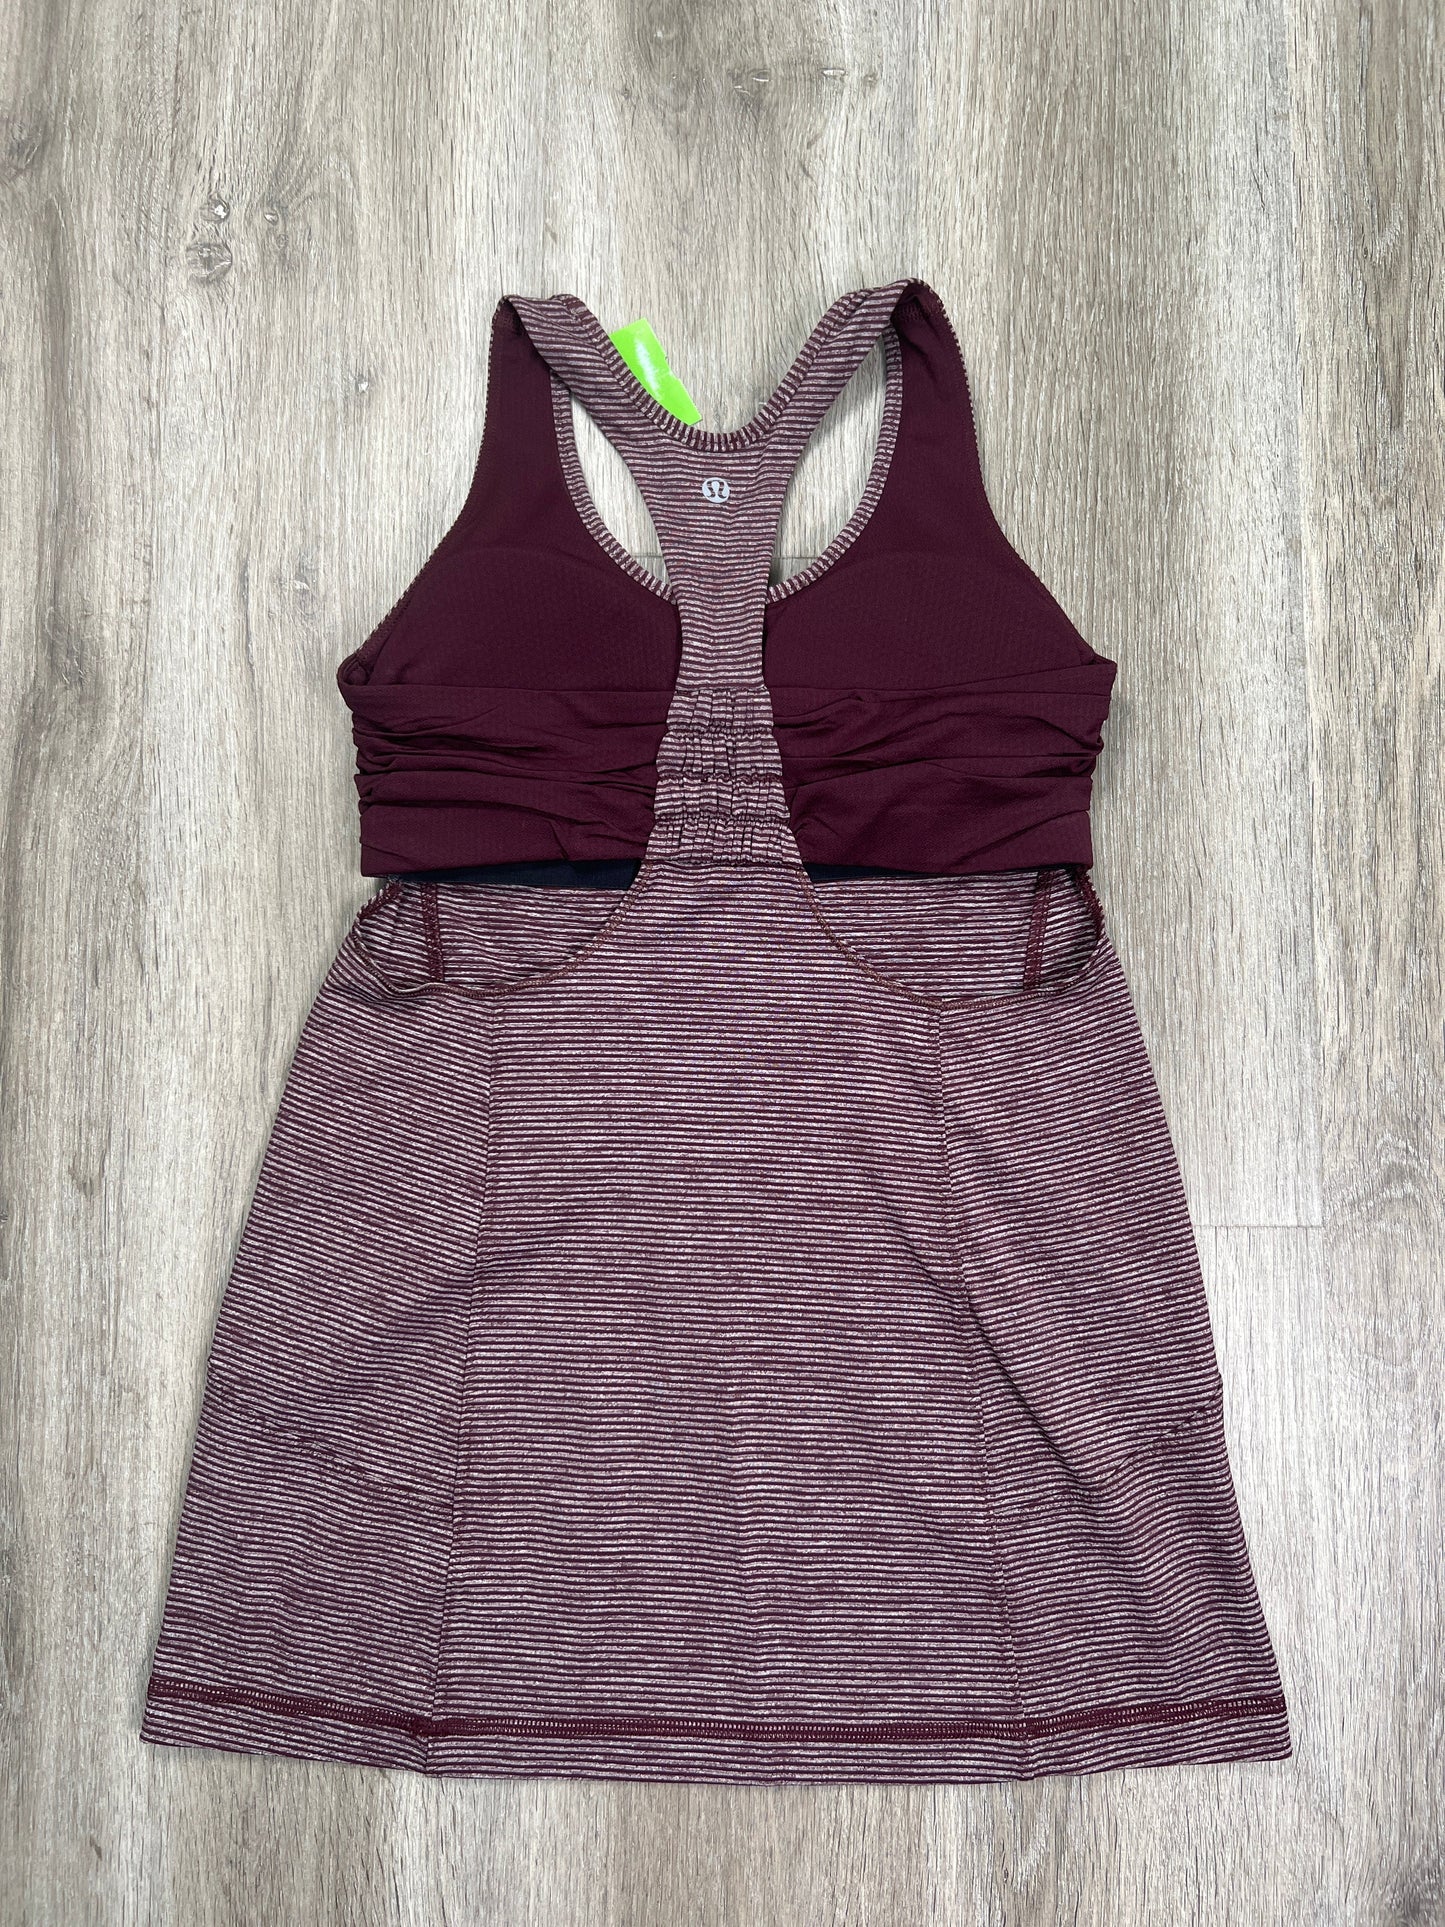 Athletic Tank Top By Lululemon  Size: S